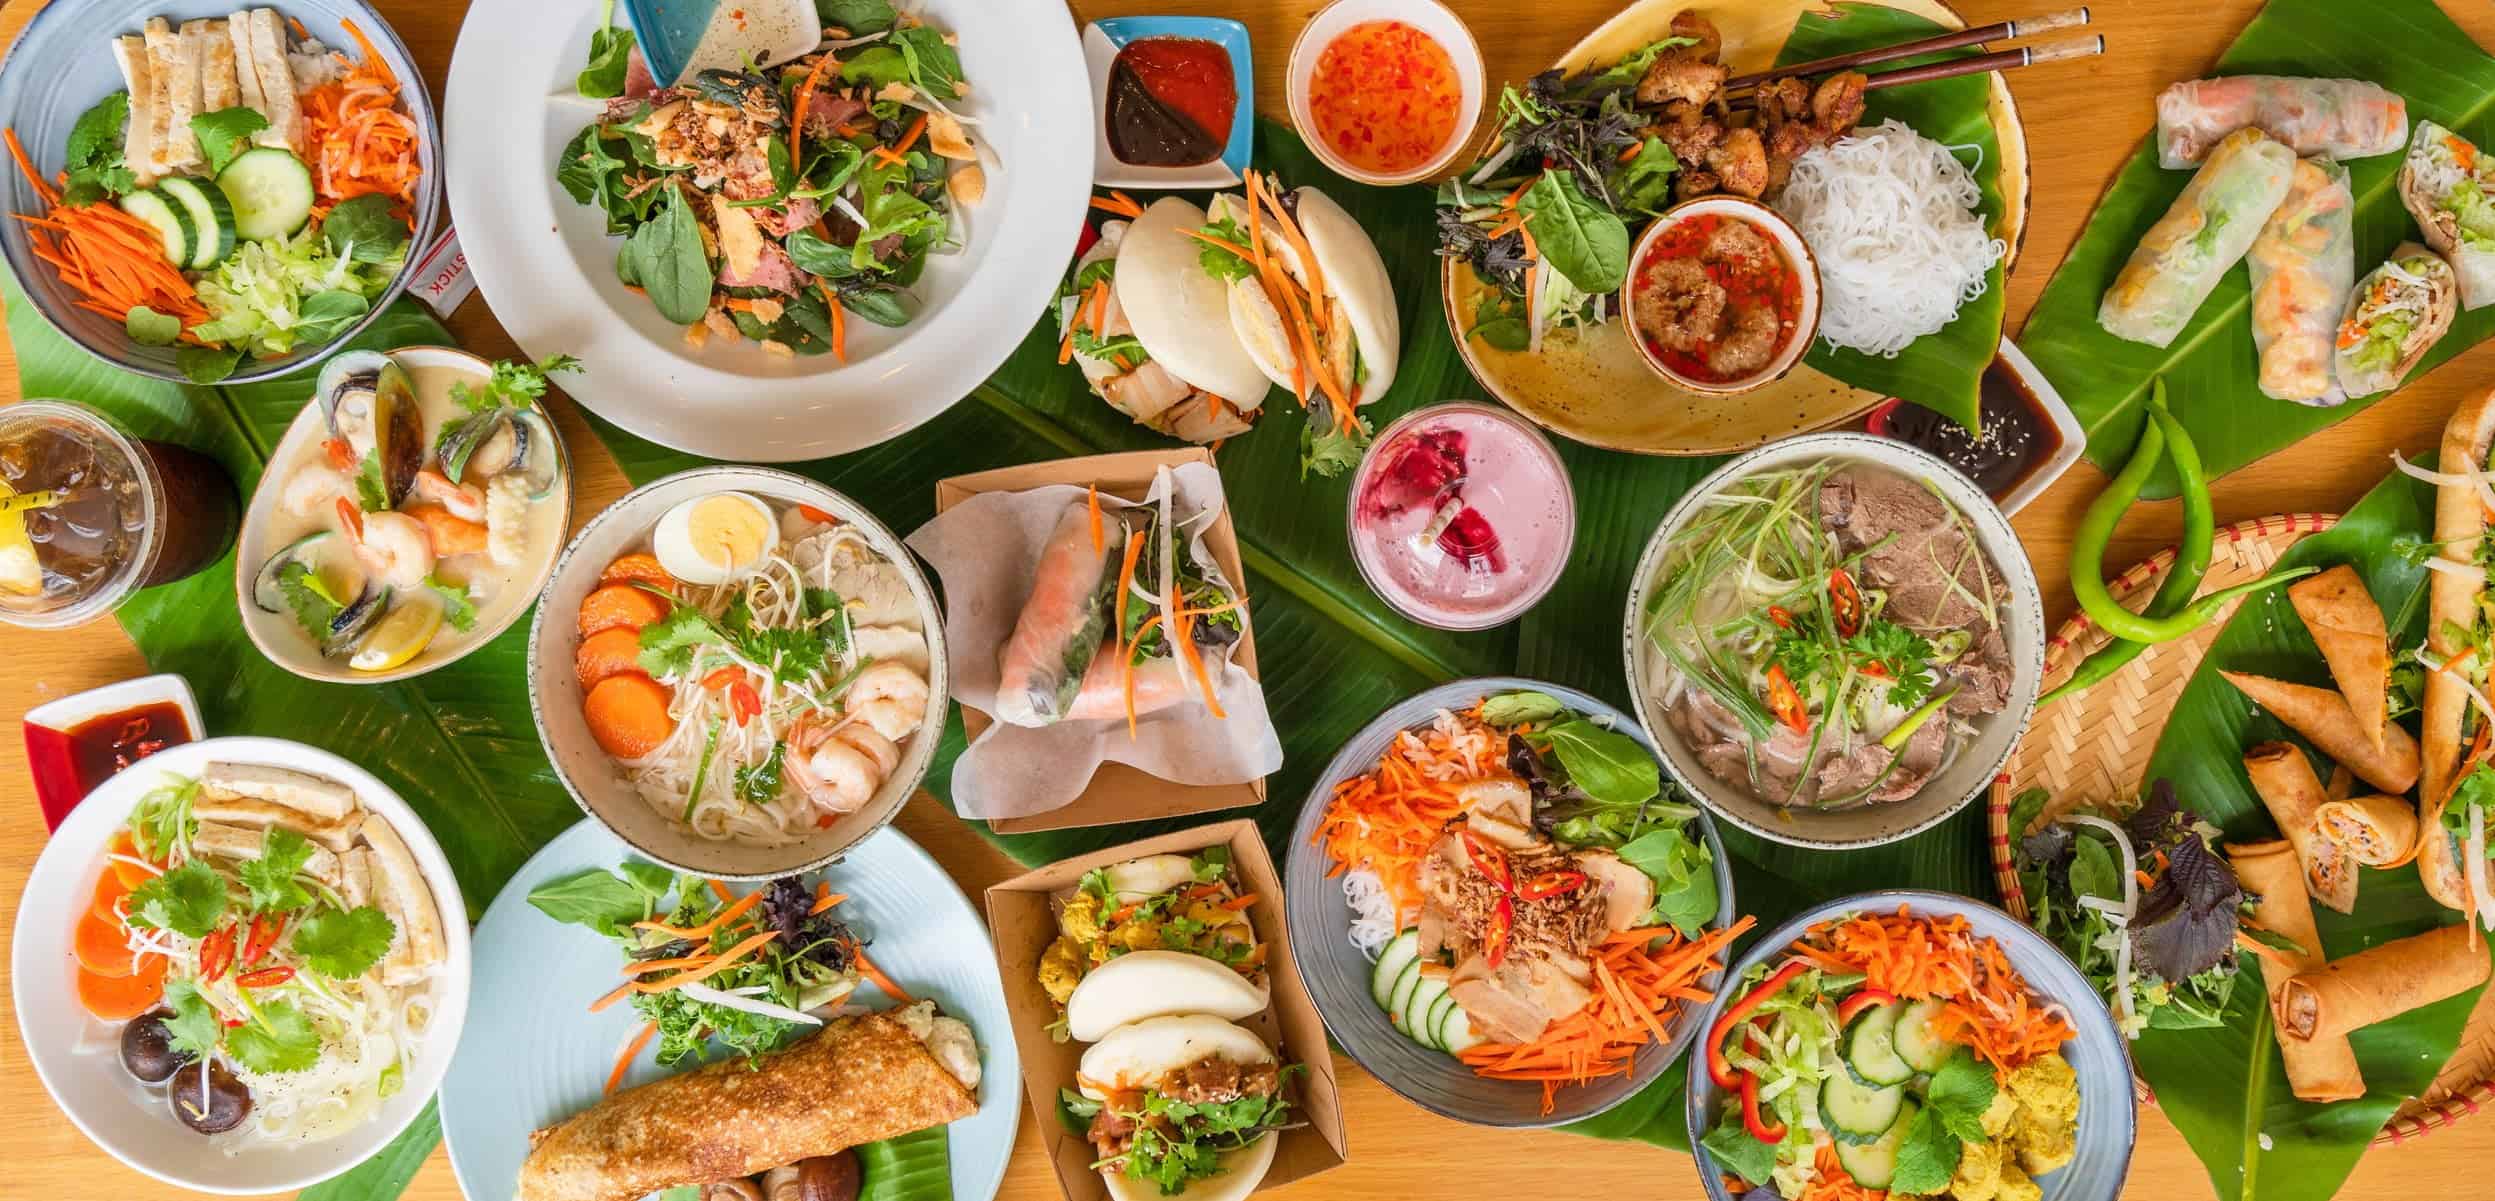 9 Traditional Dishes In Vietnam You Must Eat - Prime Travel Vietnam